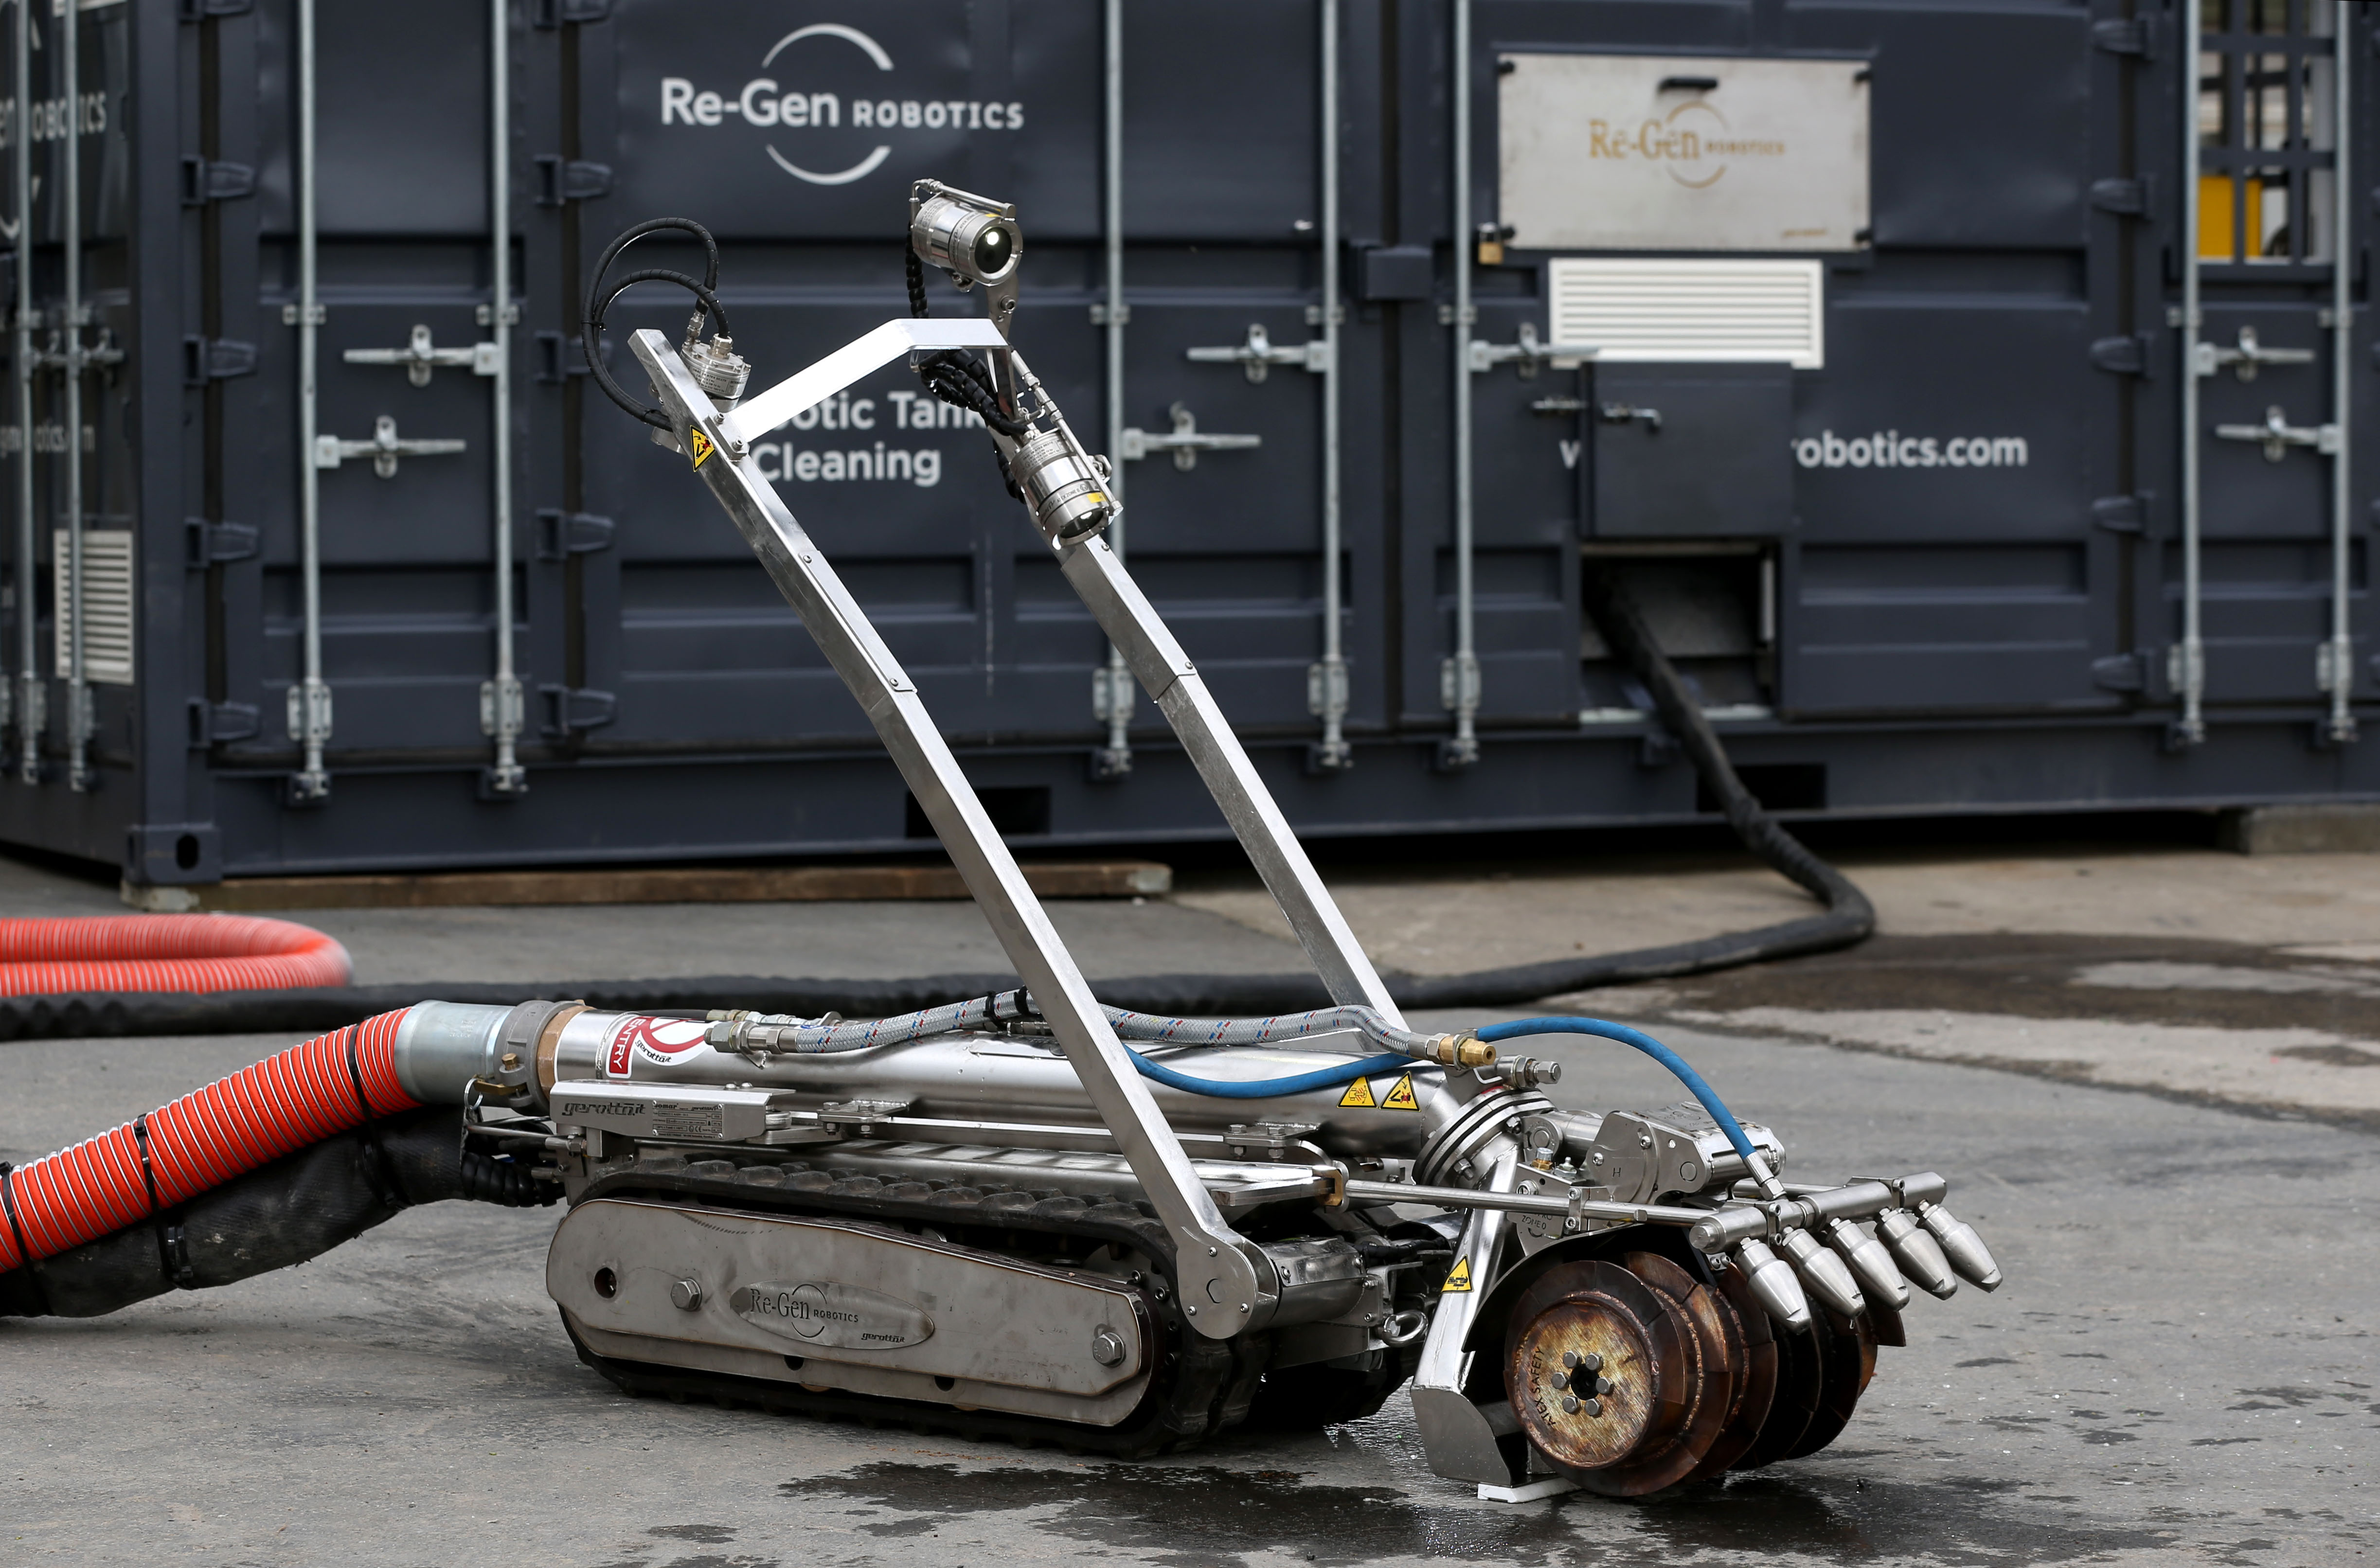 A growing order book and NPD puts Re-Gen Robotics in pole position for 2022